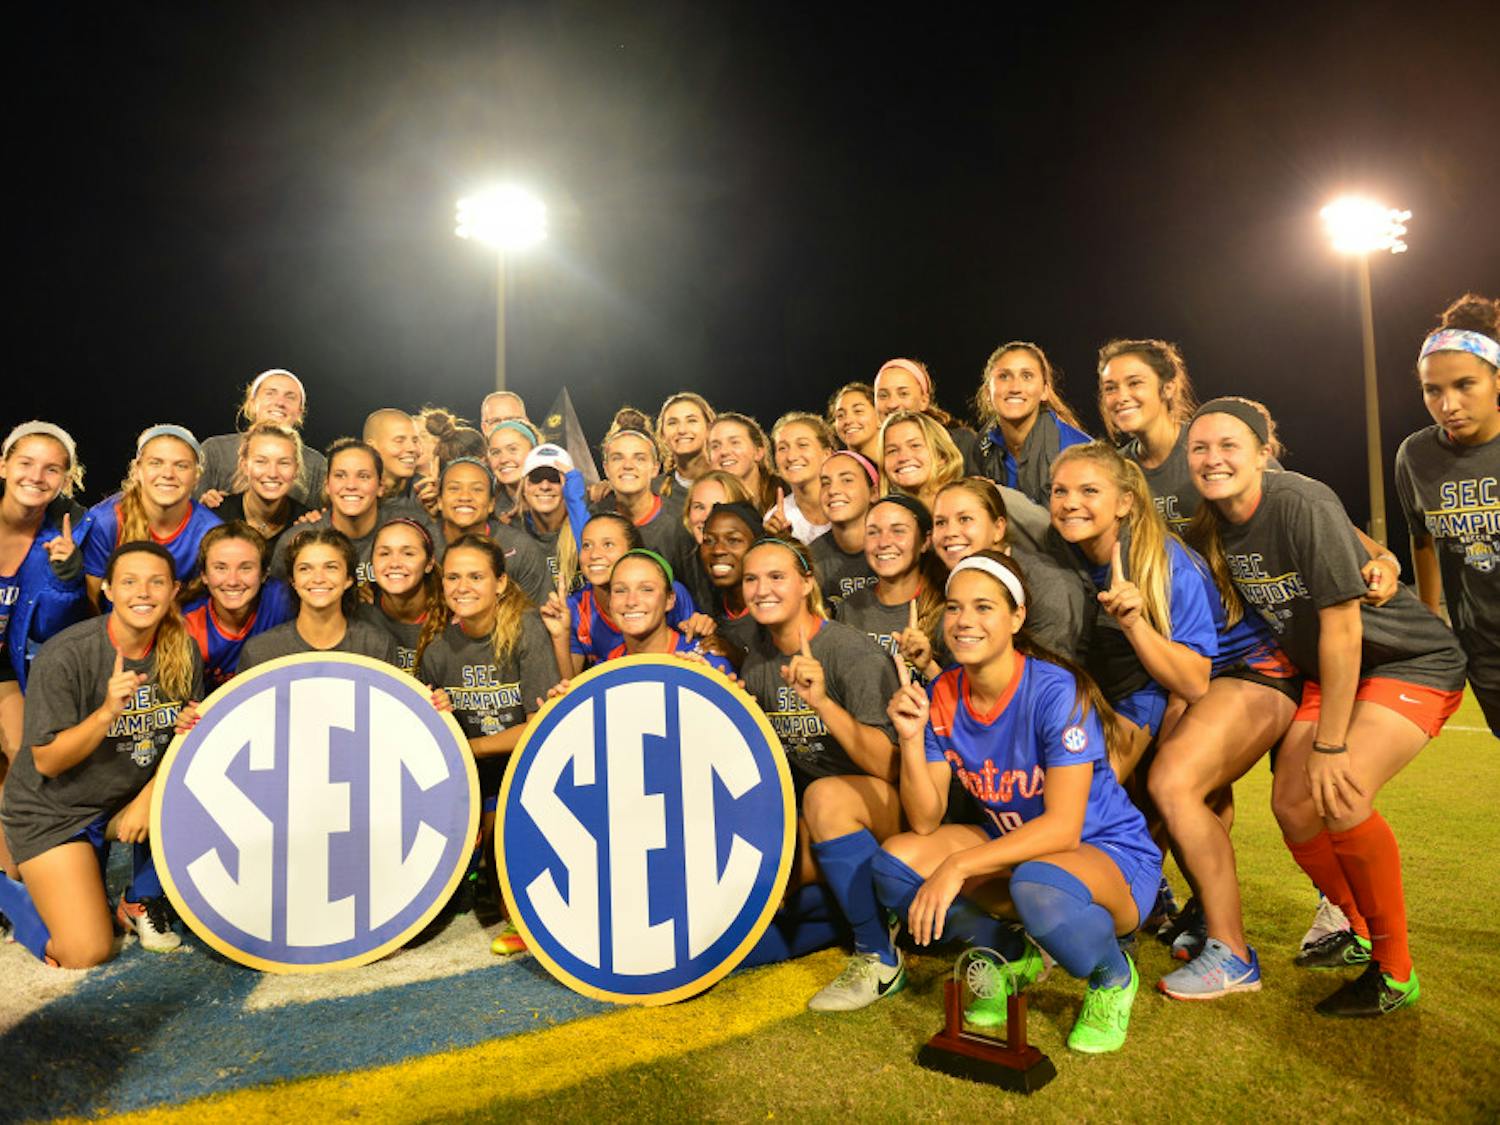 Florida celebrates its 2-1 overtime win in the 2016 Southeastern Conference Tournament championship match in Orange Beach, Alabama.